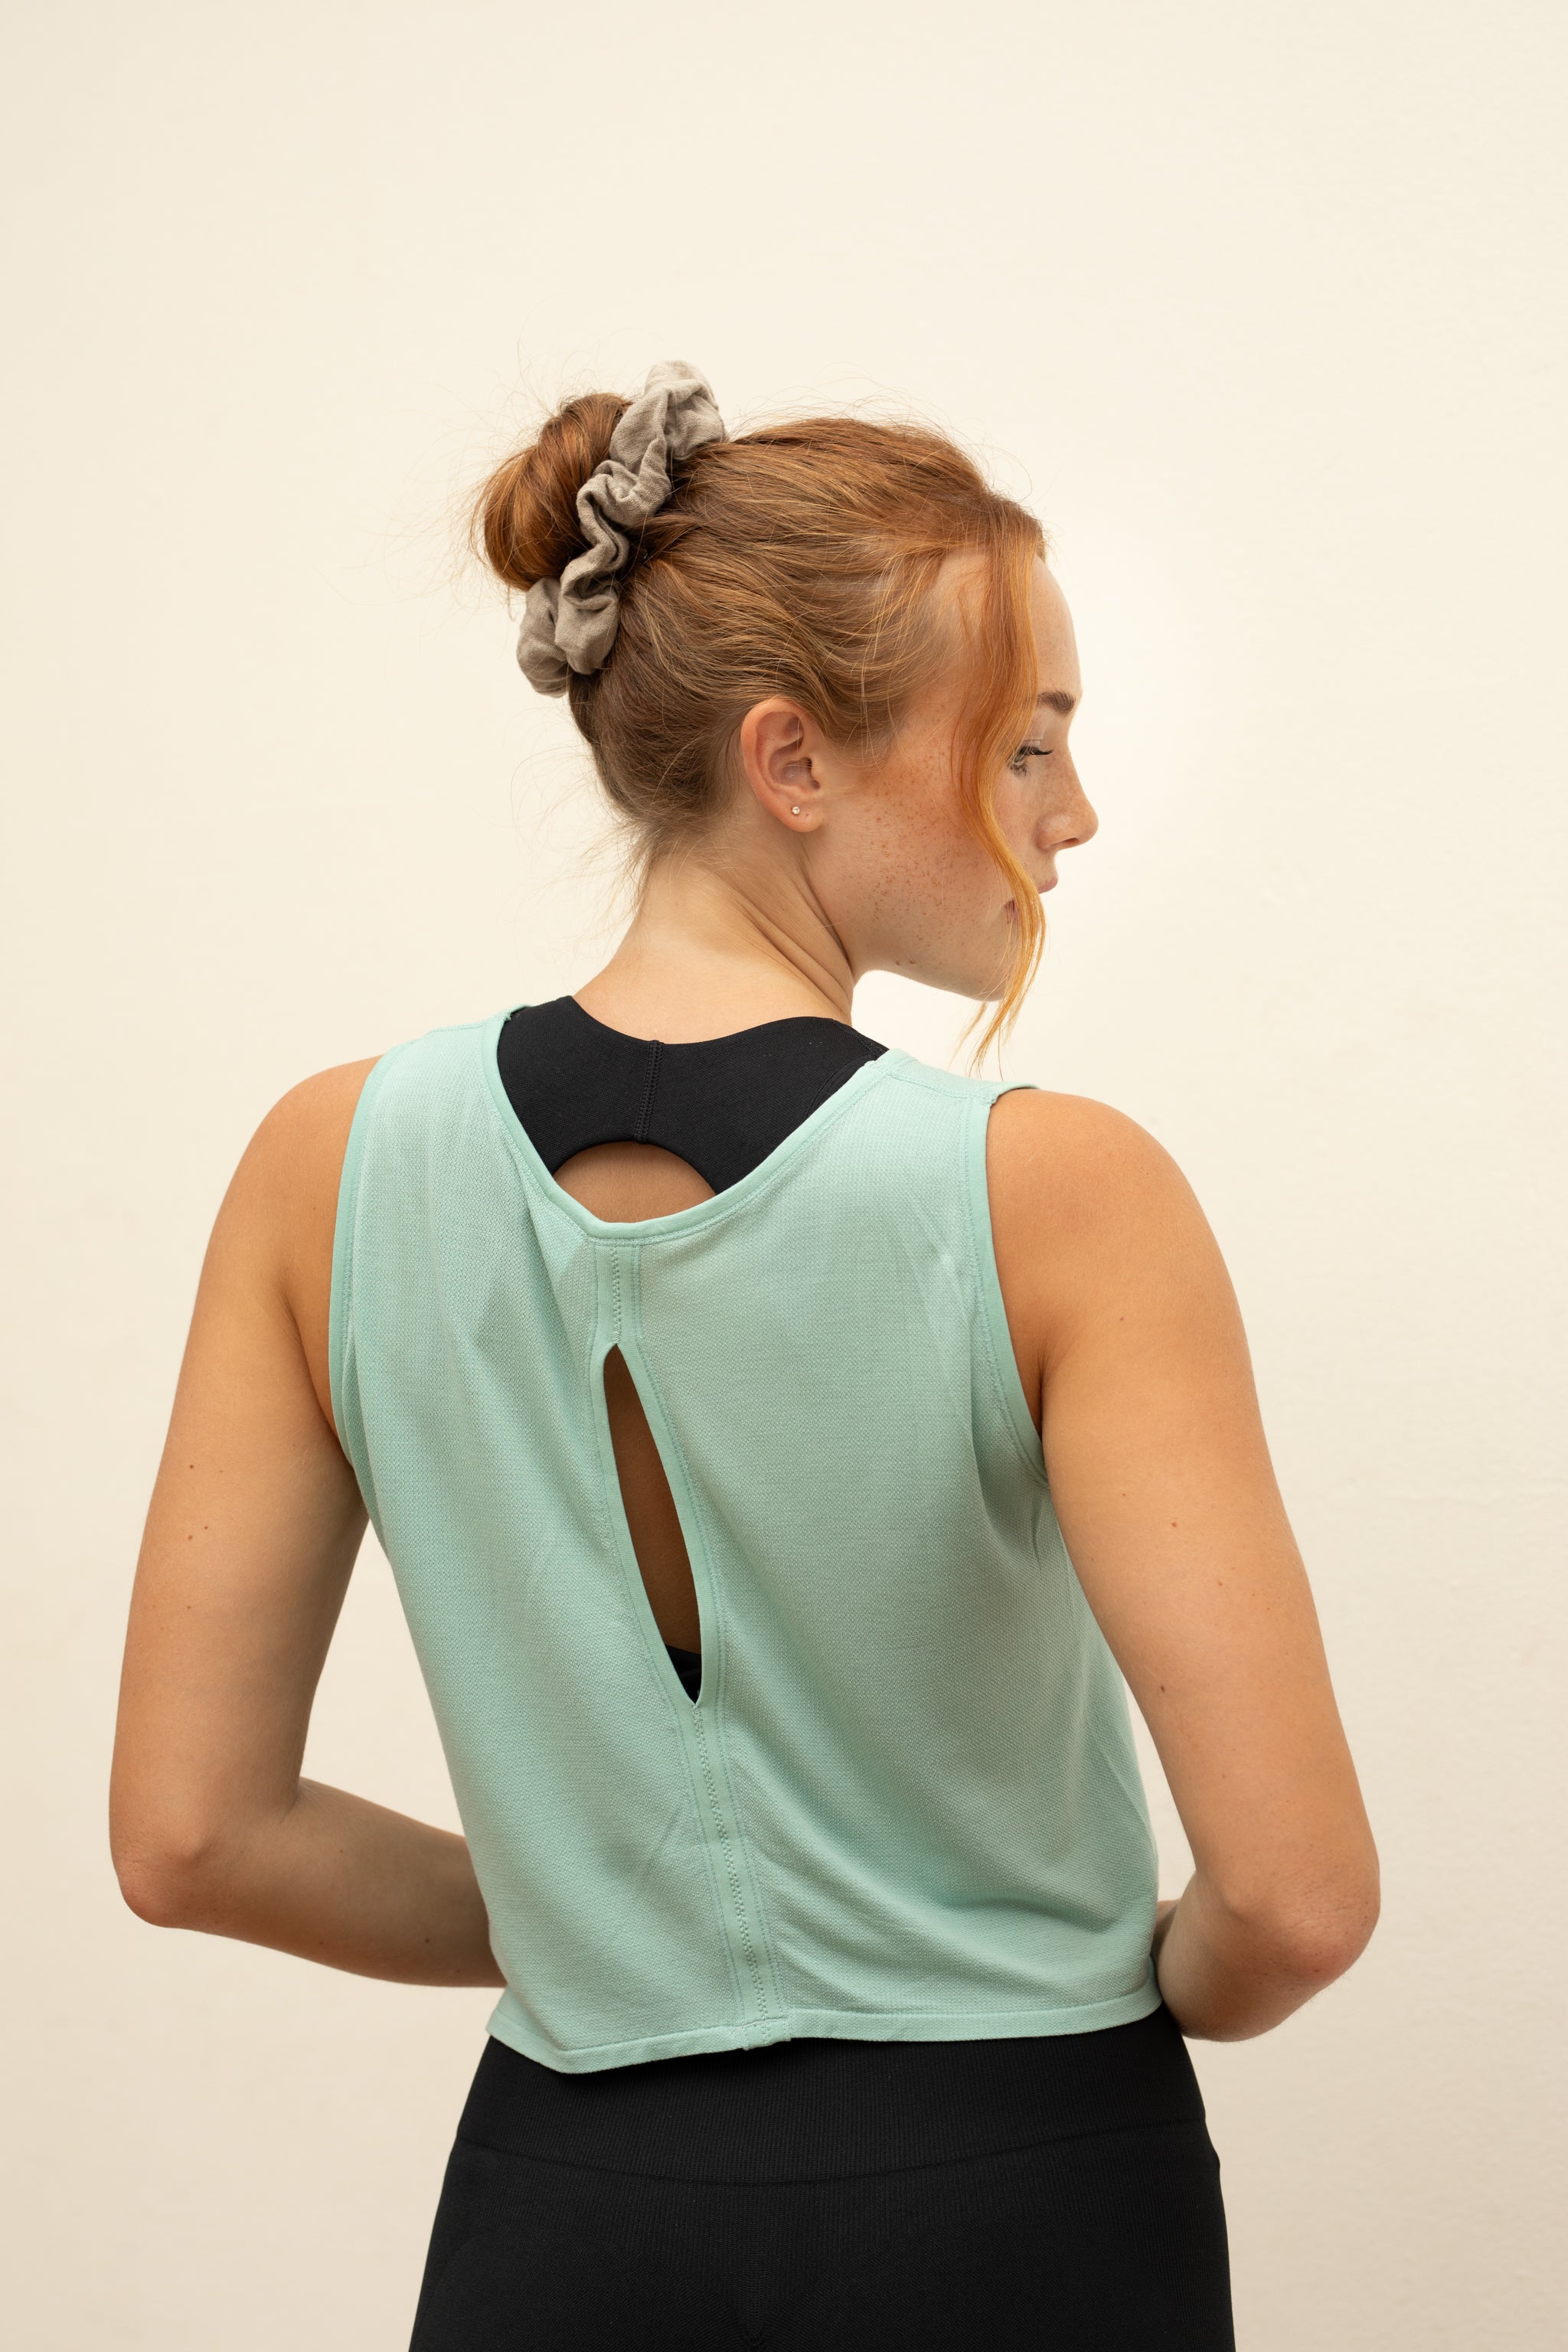 Model wearing black leggings and mint green cropped bamboo top for sustainable activewear brand, Jilla.